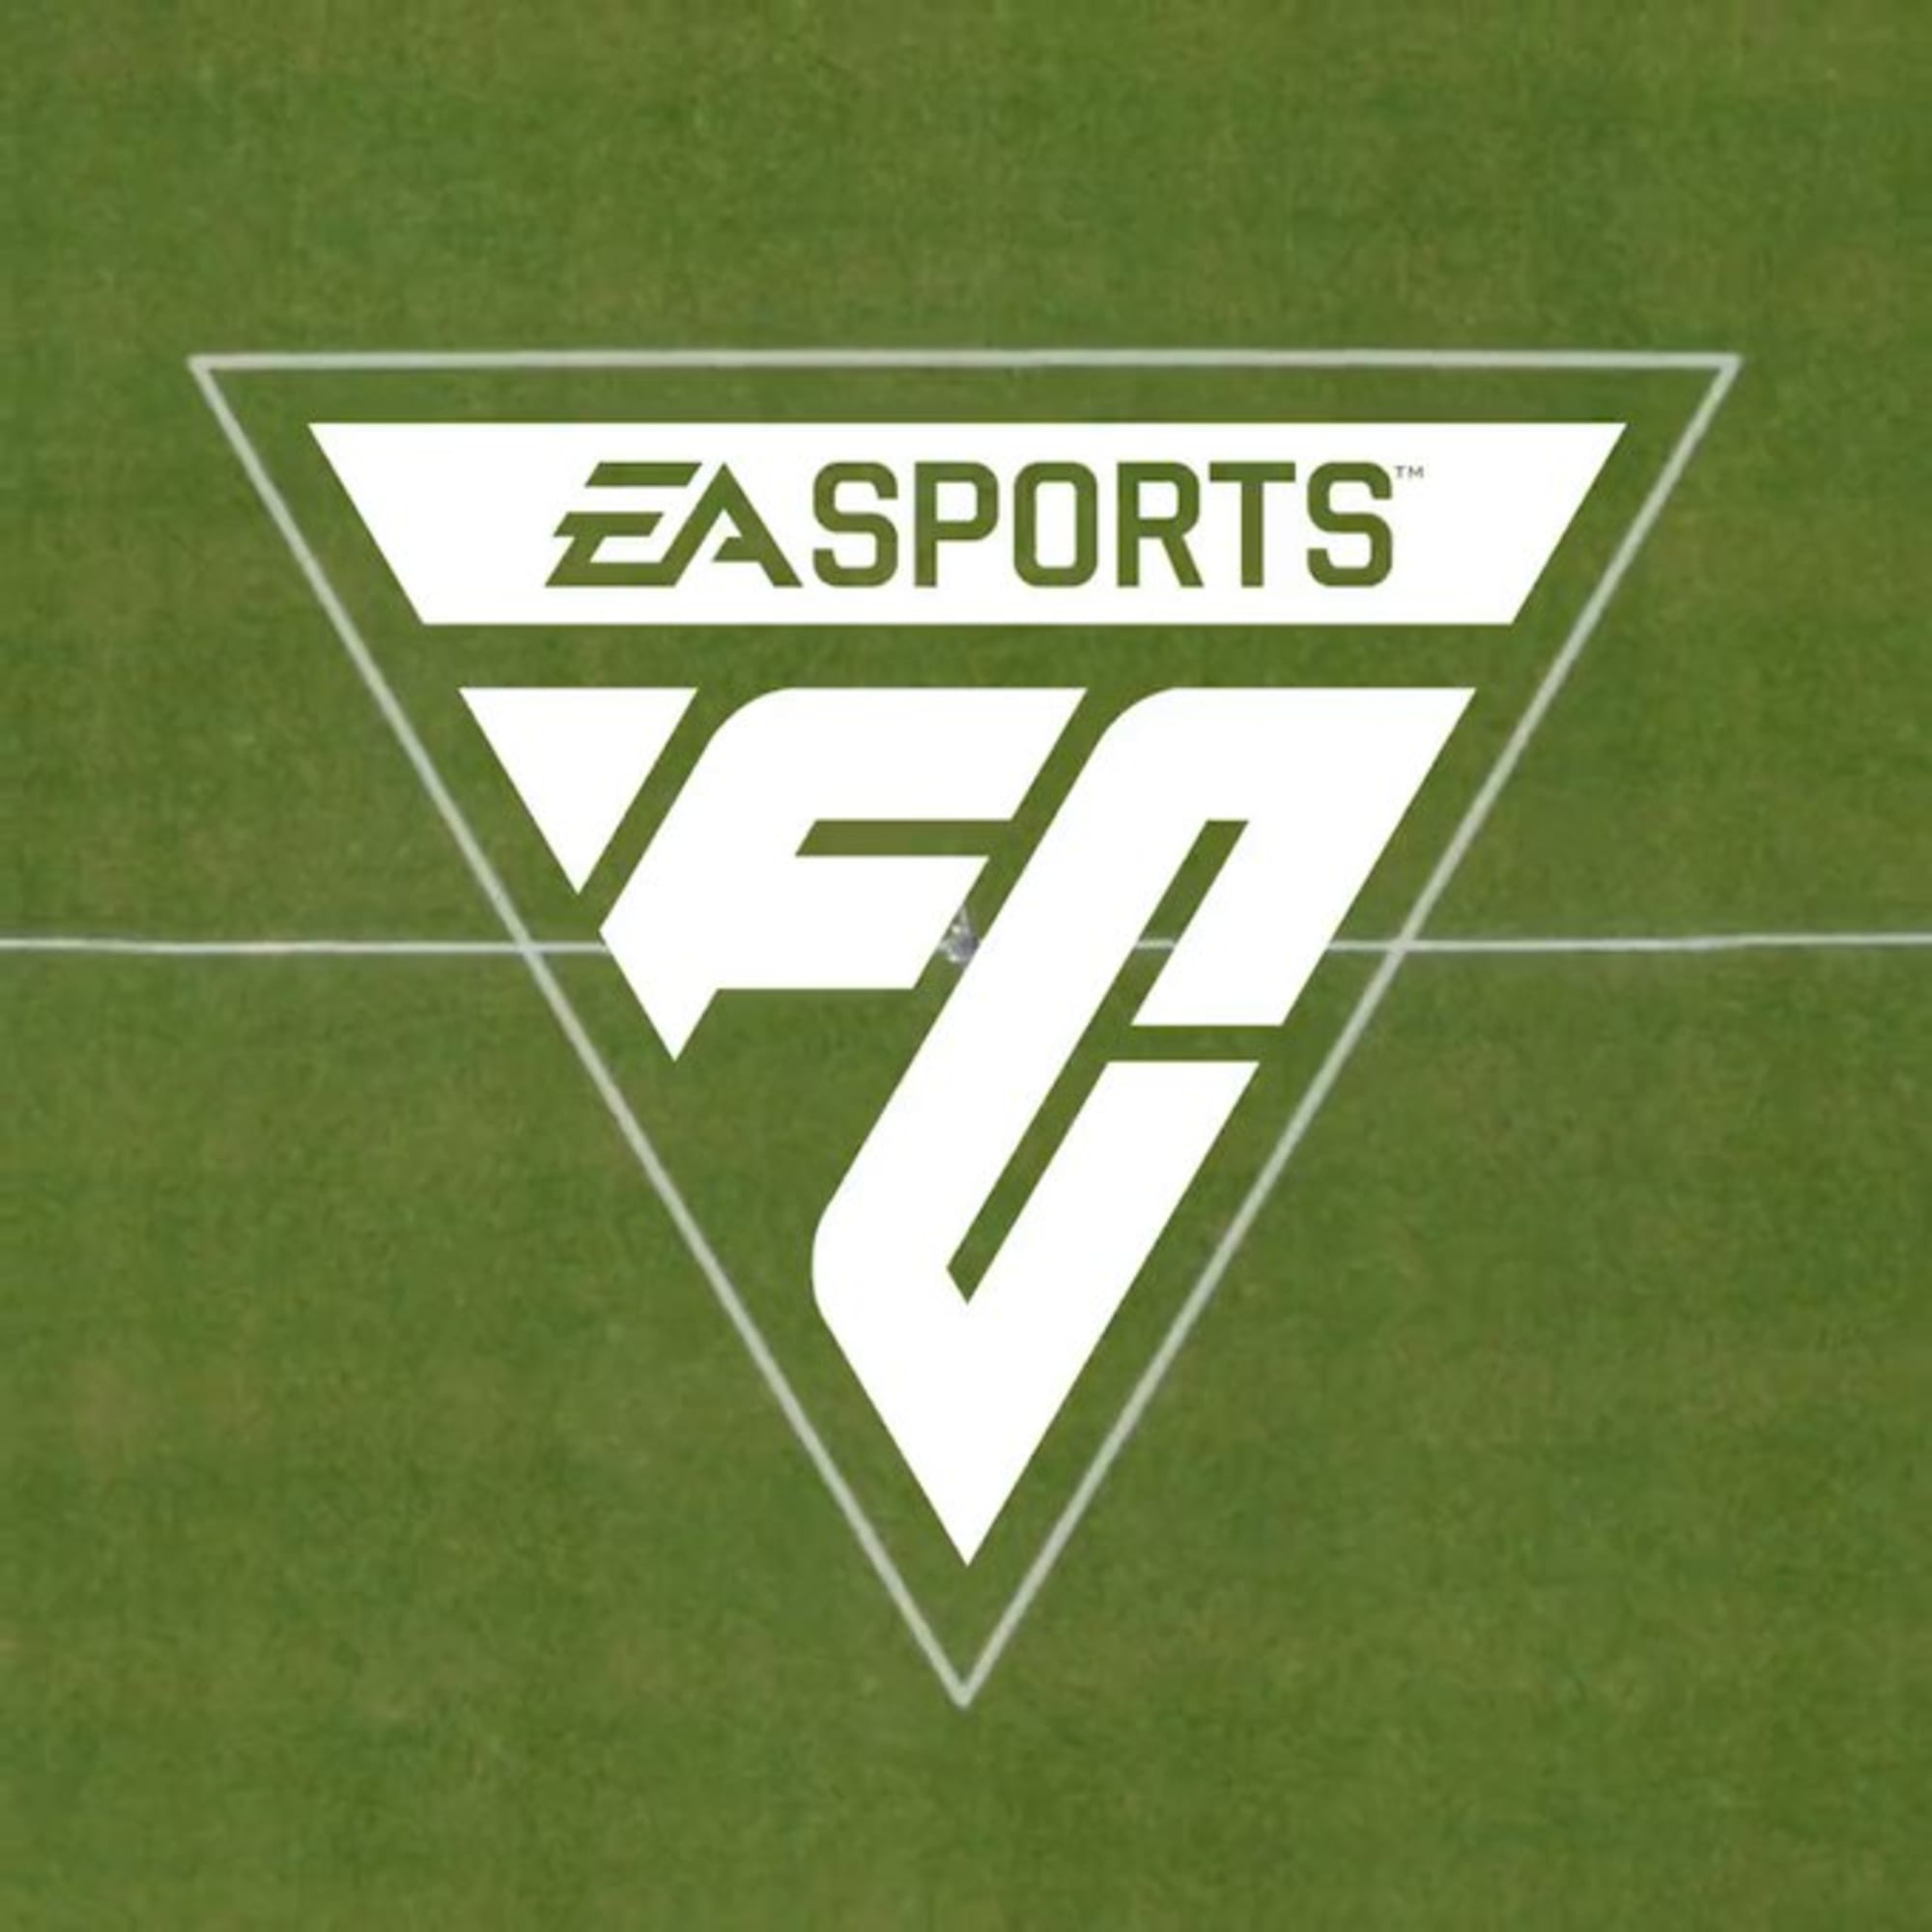 EA FC 24 leaks: New Web App expected release date